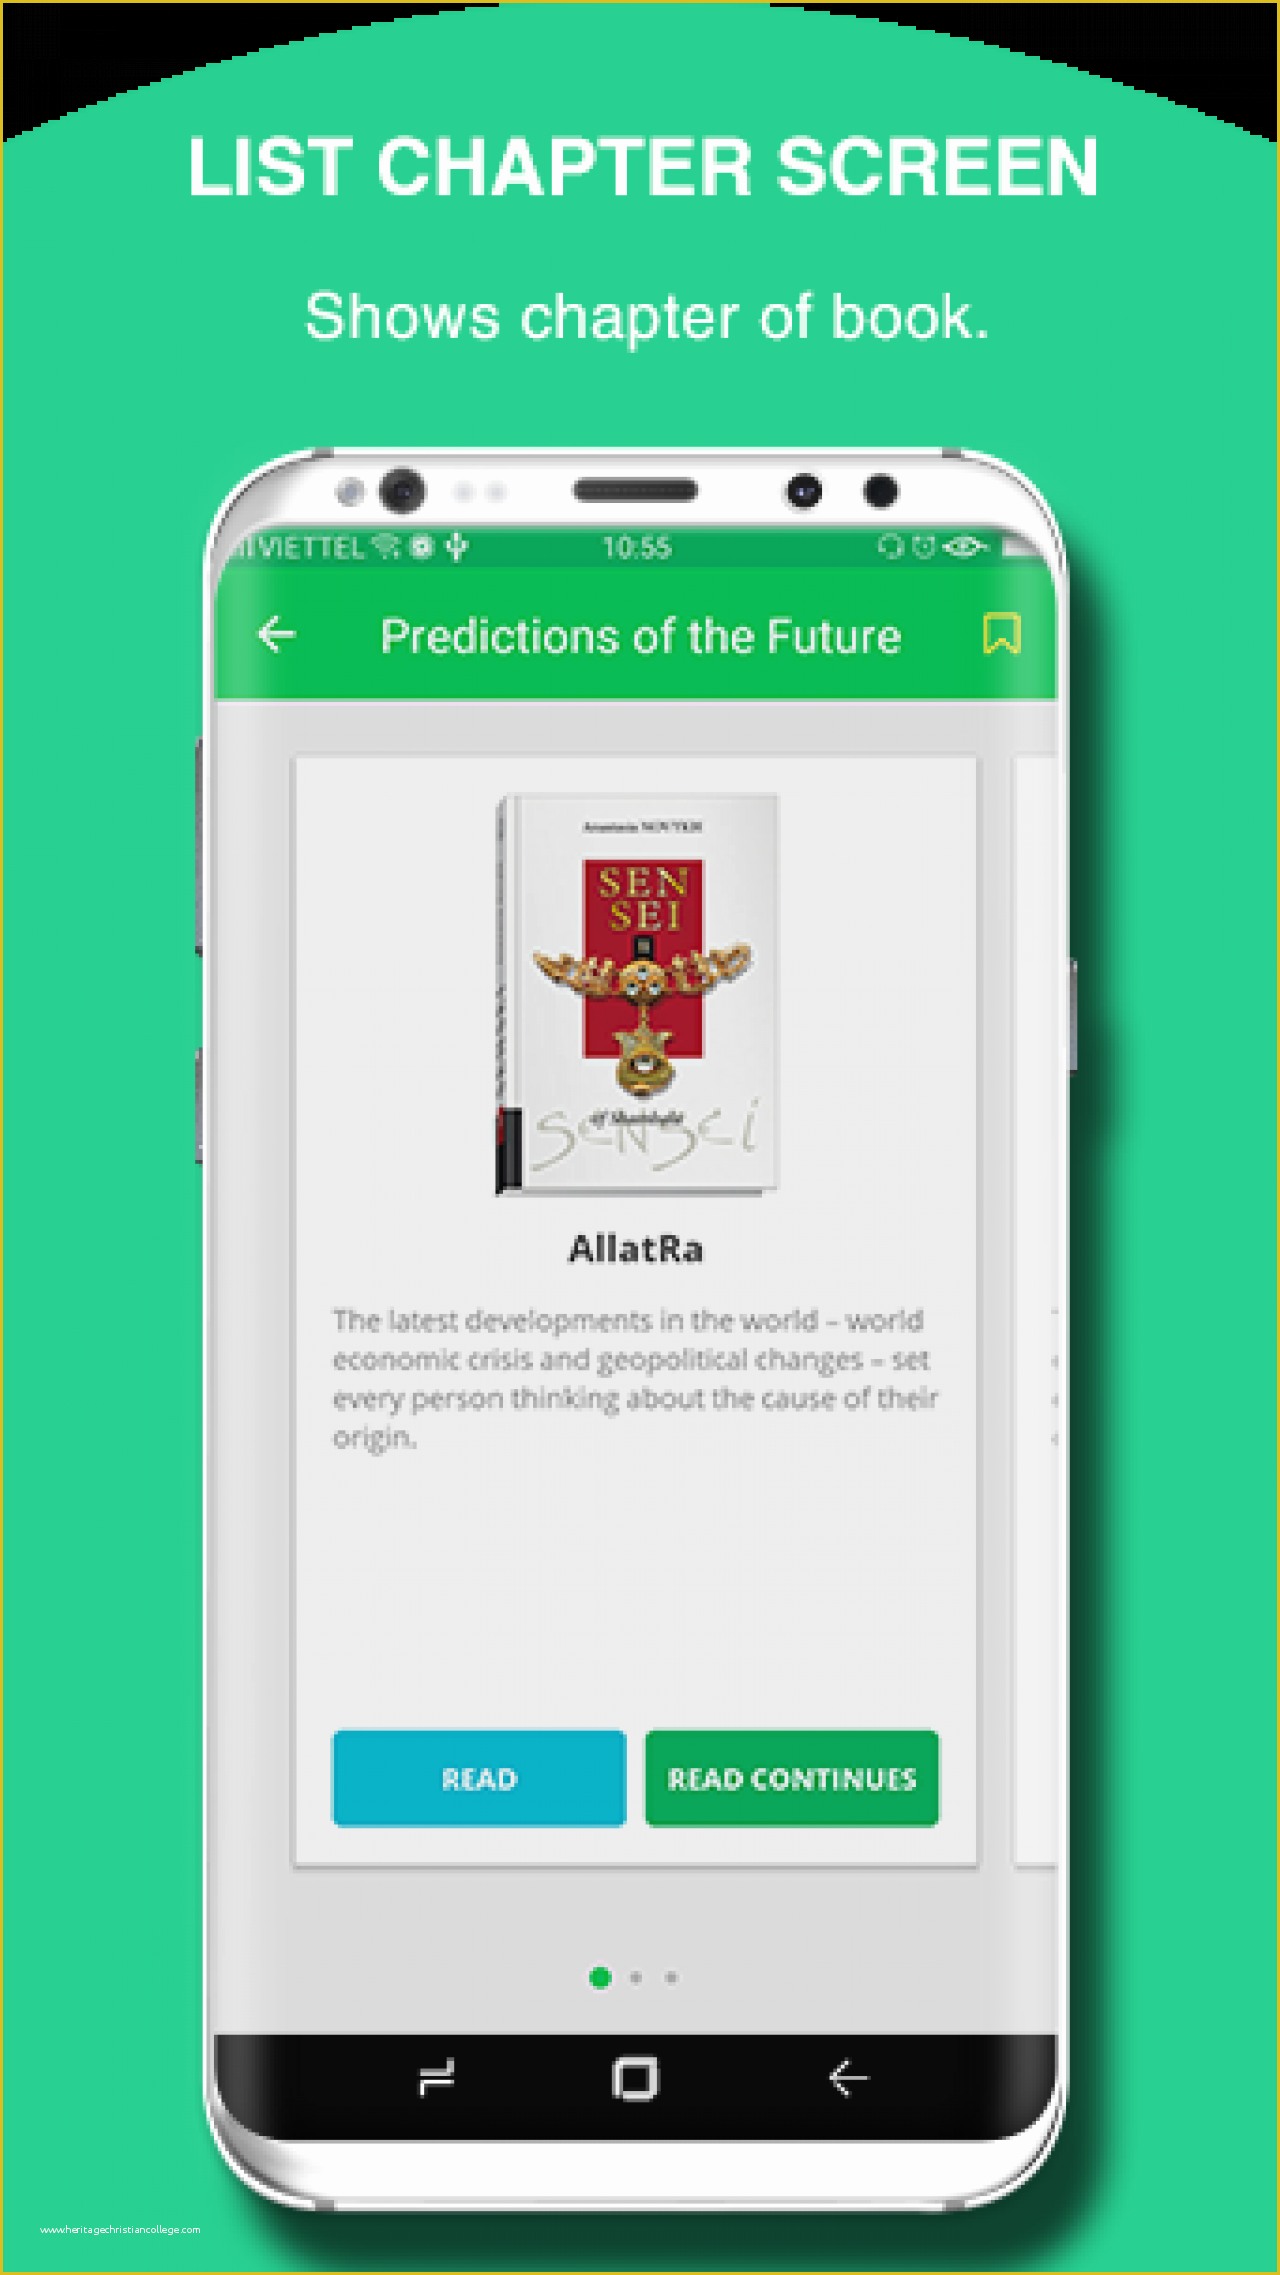 App Templates Free android Of Buy Ebook App Template for android Books and Utilities